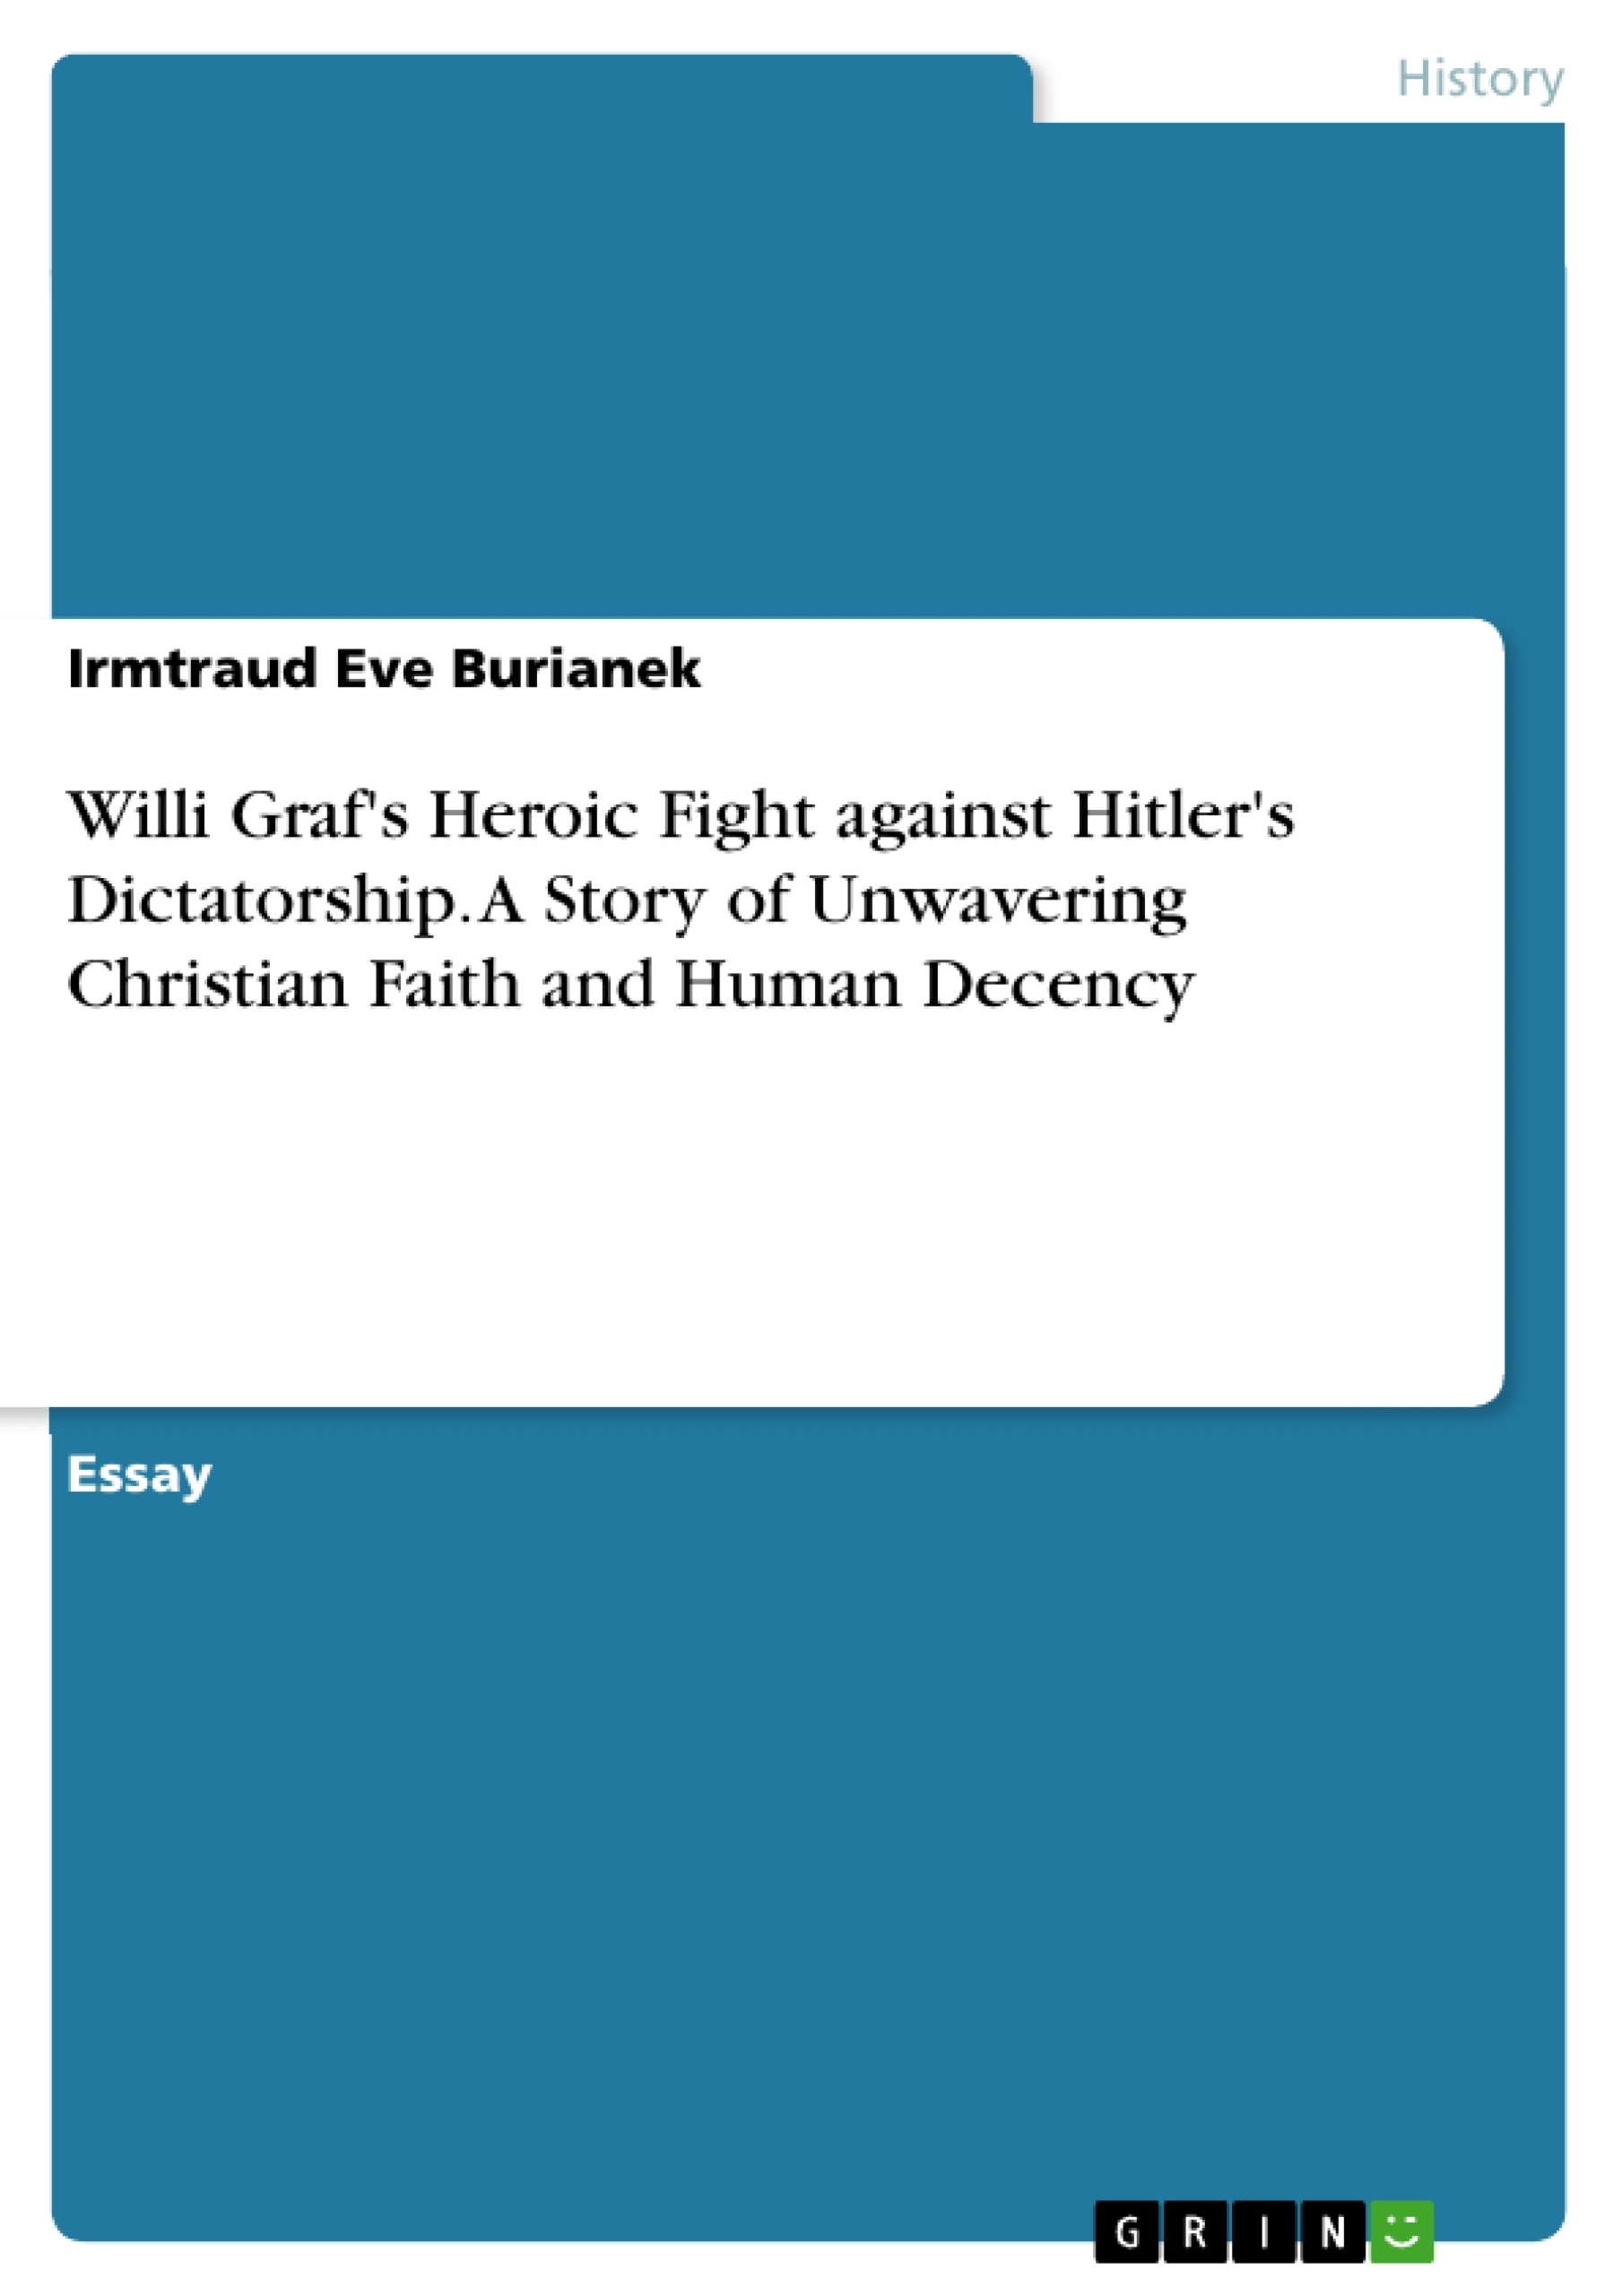 Title: Willi Graf's Heroic Fight against Hitler's Dictatorship. A Story of Unwavering Christian Faith and Human Decency